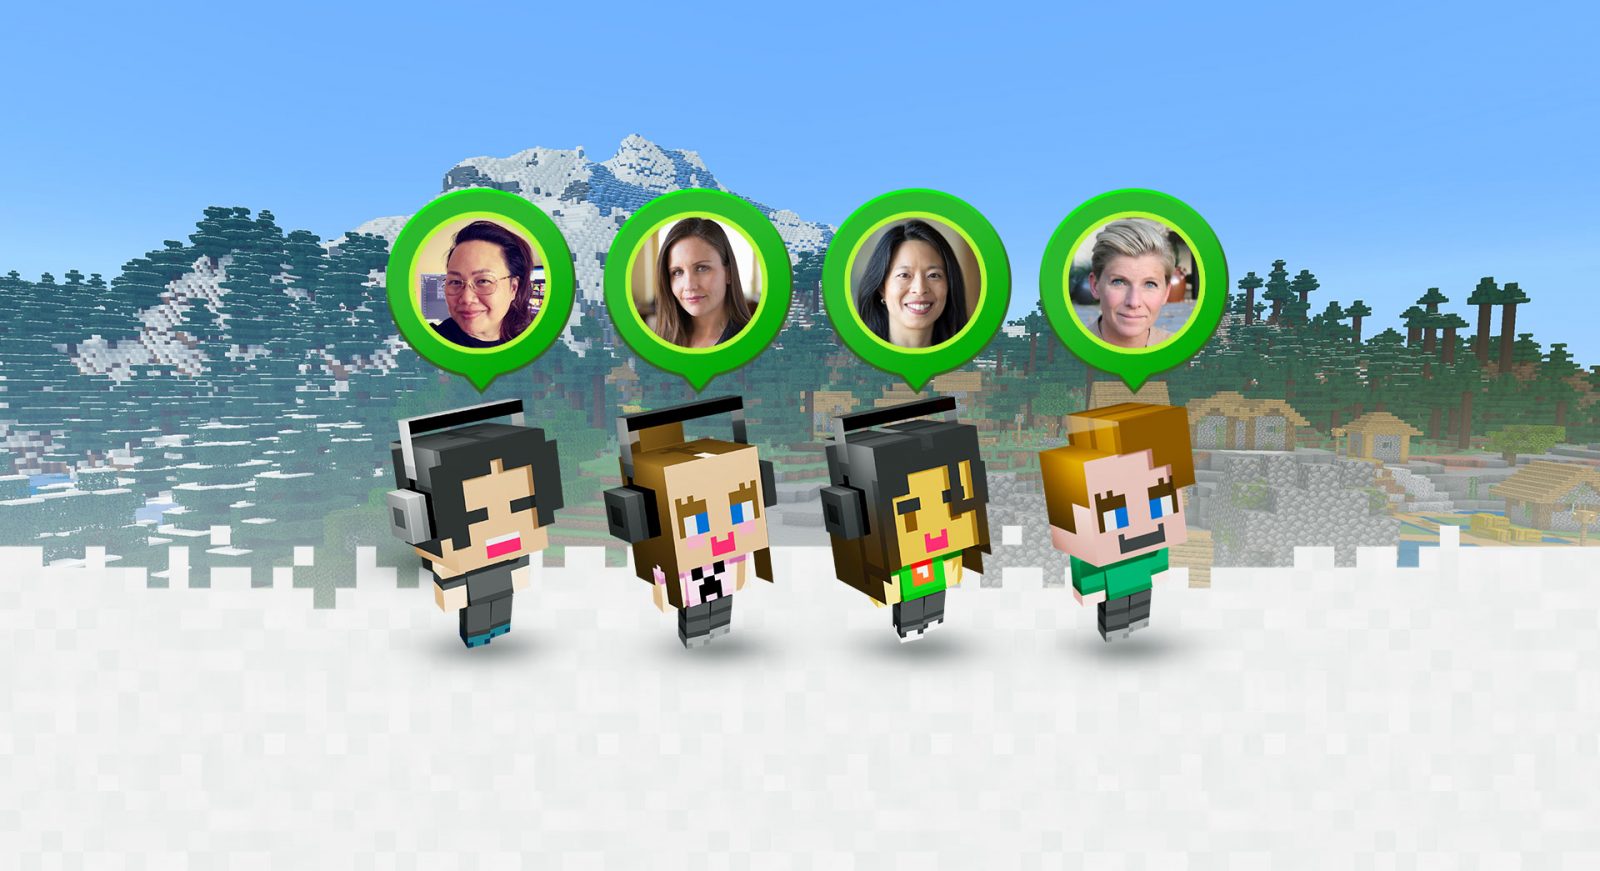 Minecraft mountainscape with 4 Minecraft characters walking on snow with headshots of their real counterparts above them